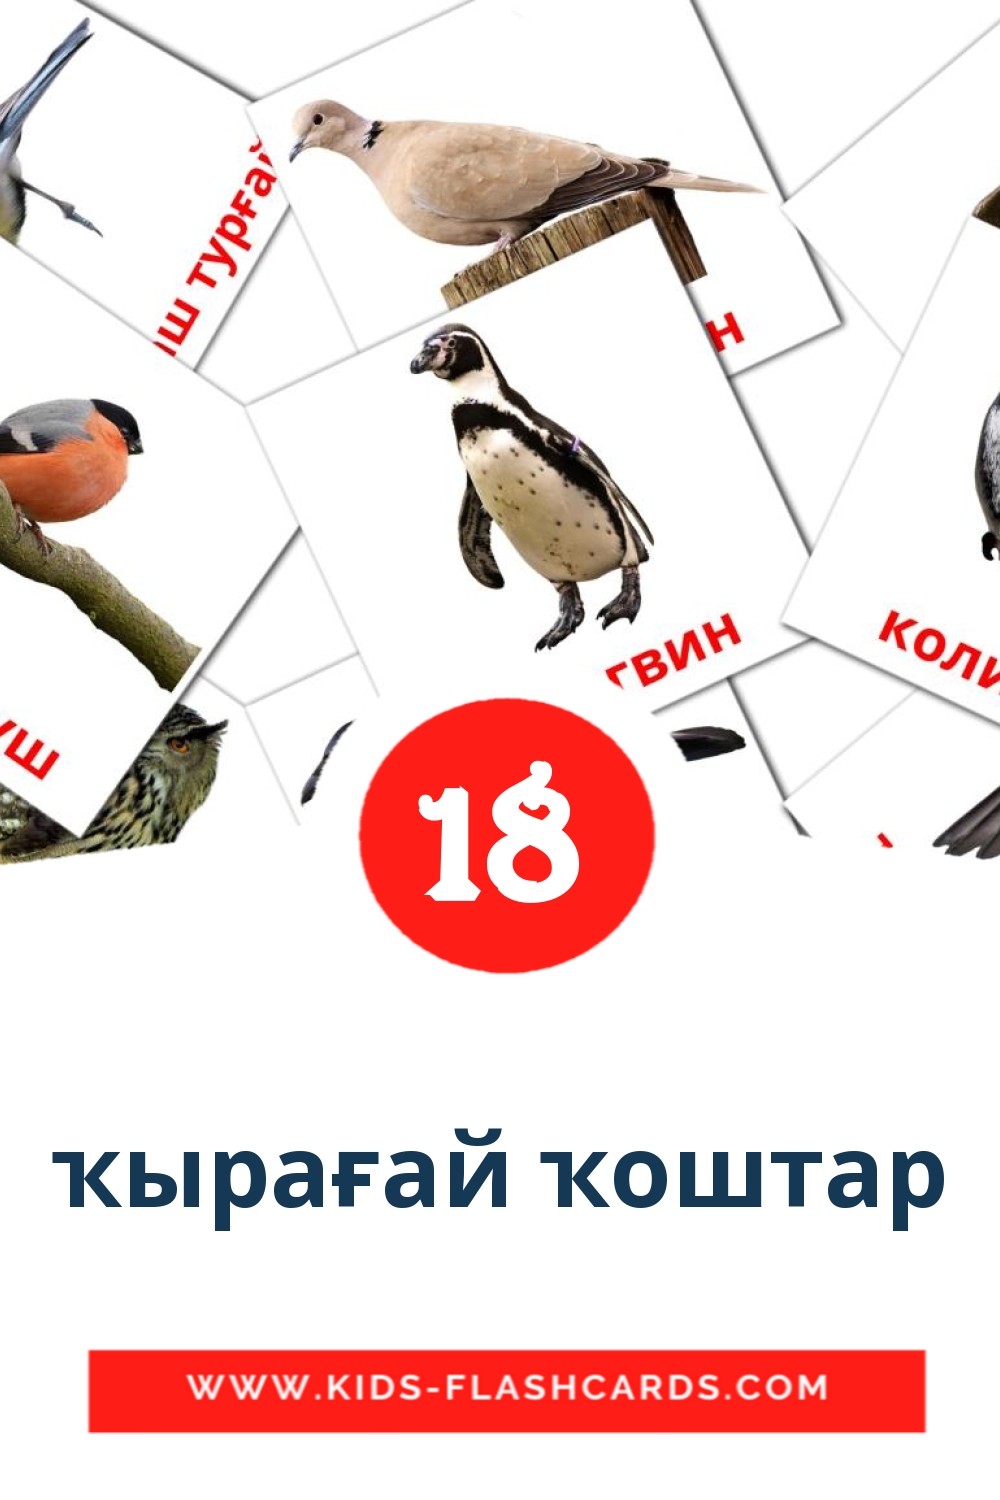 18 ҡырағай ҡоштар Picture Cards for Kindergarden in bashkir